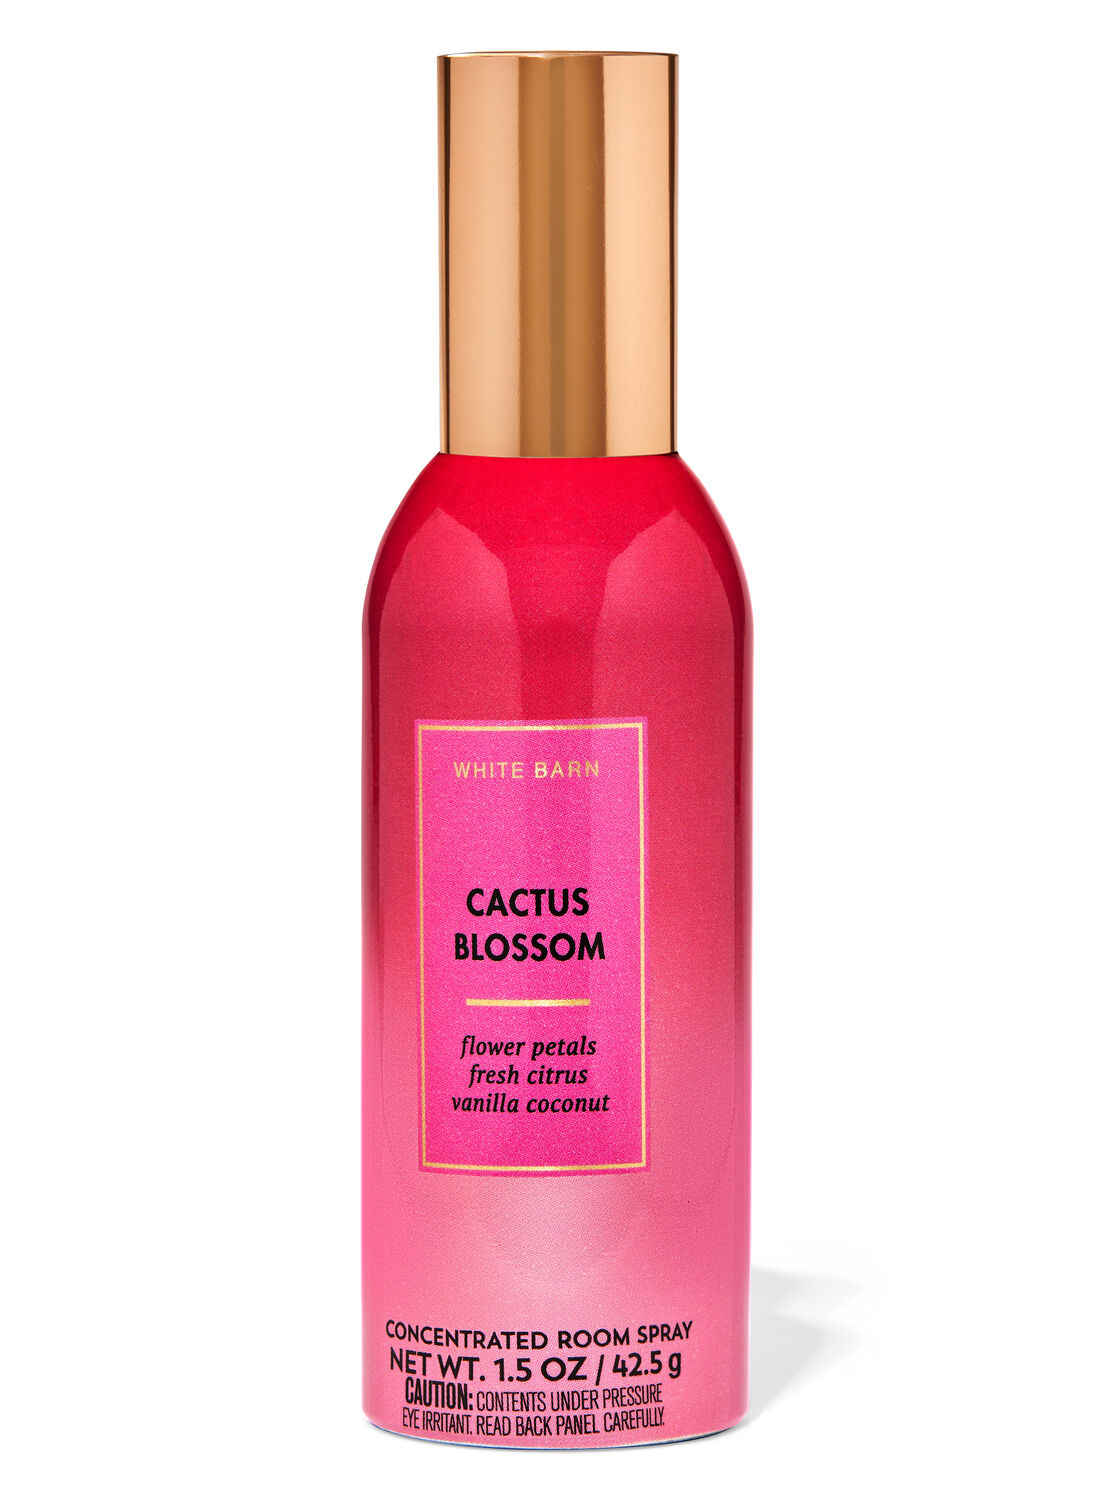 Cactus Blossom Concentrated Room Spray